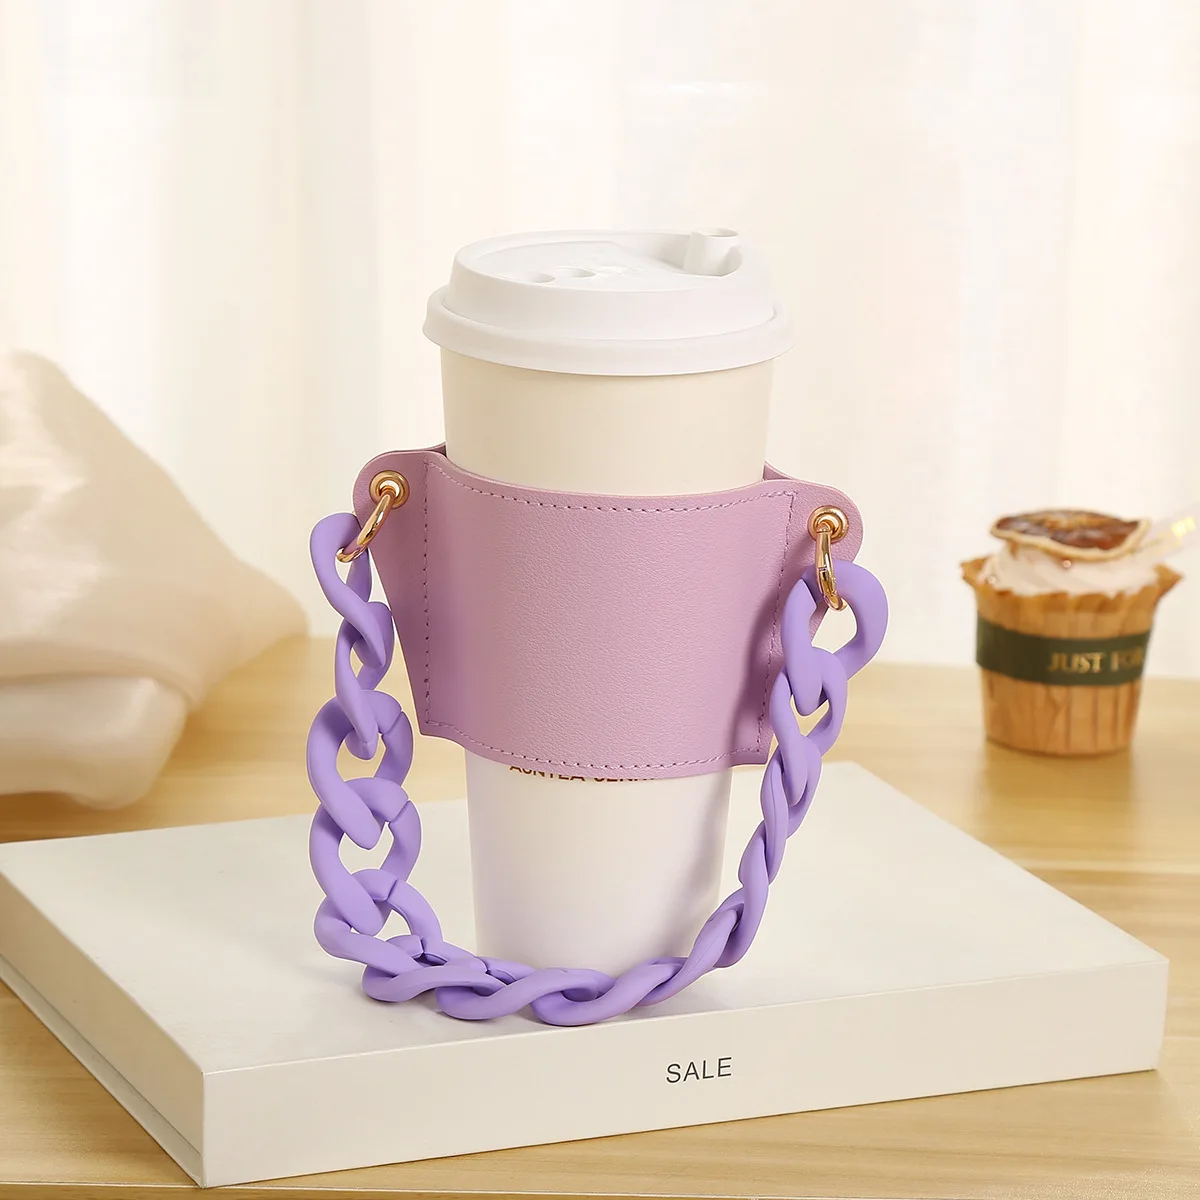 Manufacturers Customized LOGO Printed Acrylic Chain Soft Elastic Leather Hot Coffee Cup With PU Sleeves